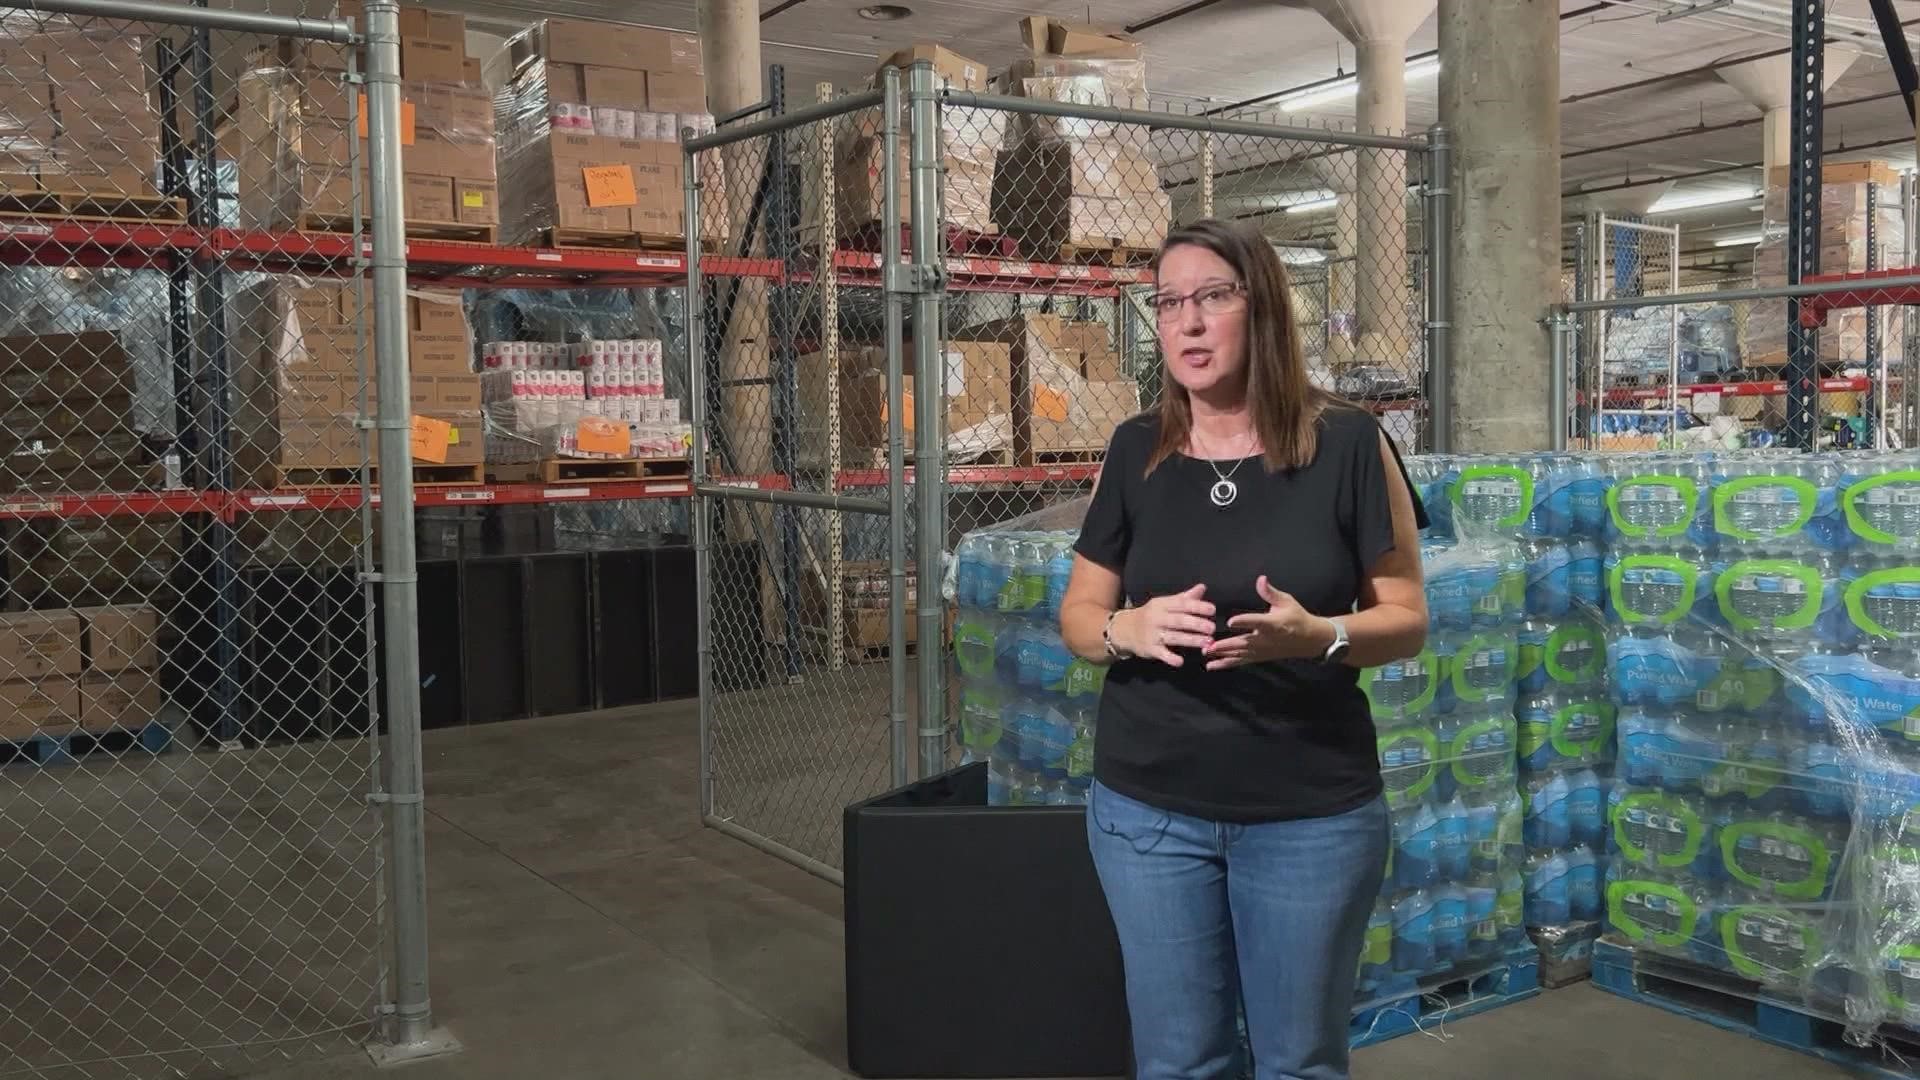 Non-profit is going through twice as many bottled waters in the midst of historic heat wave.